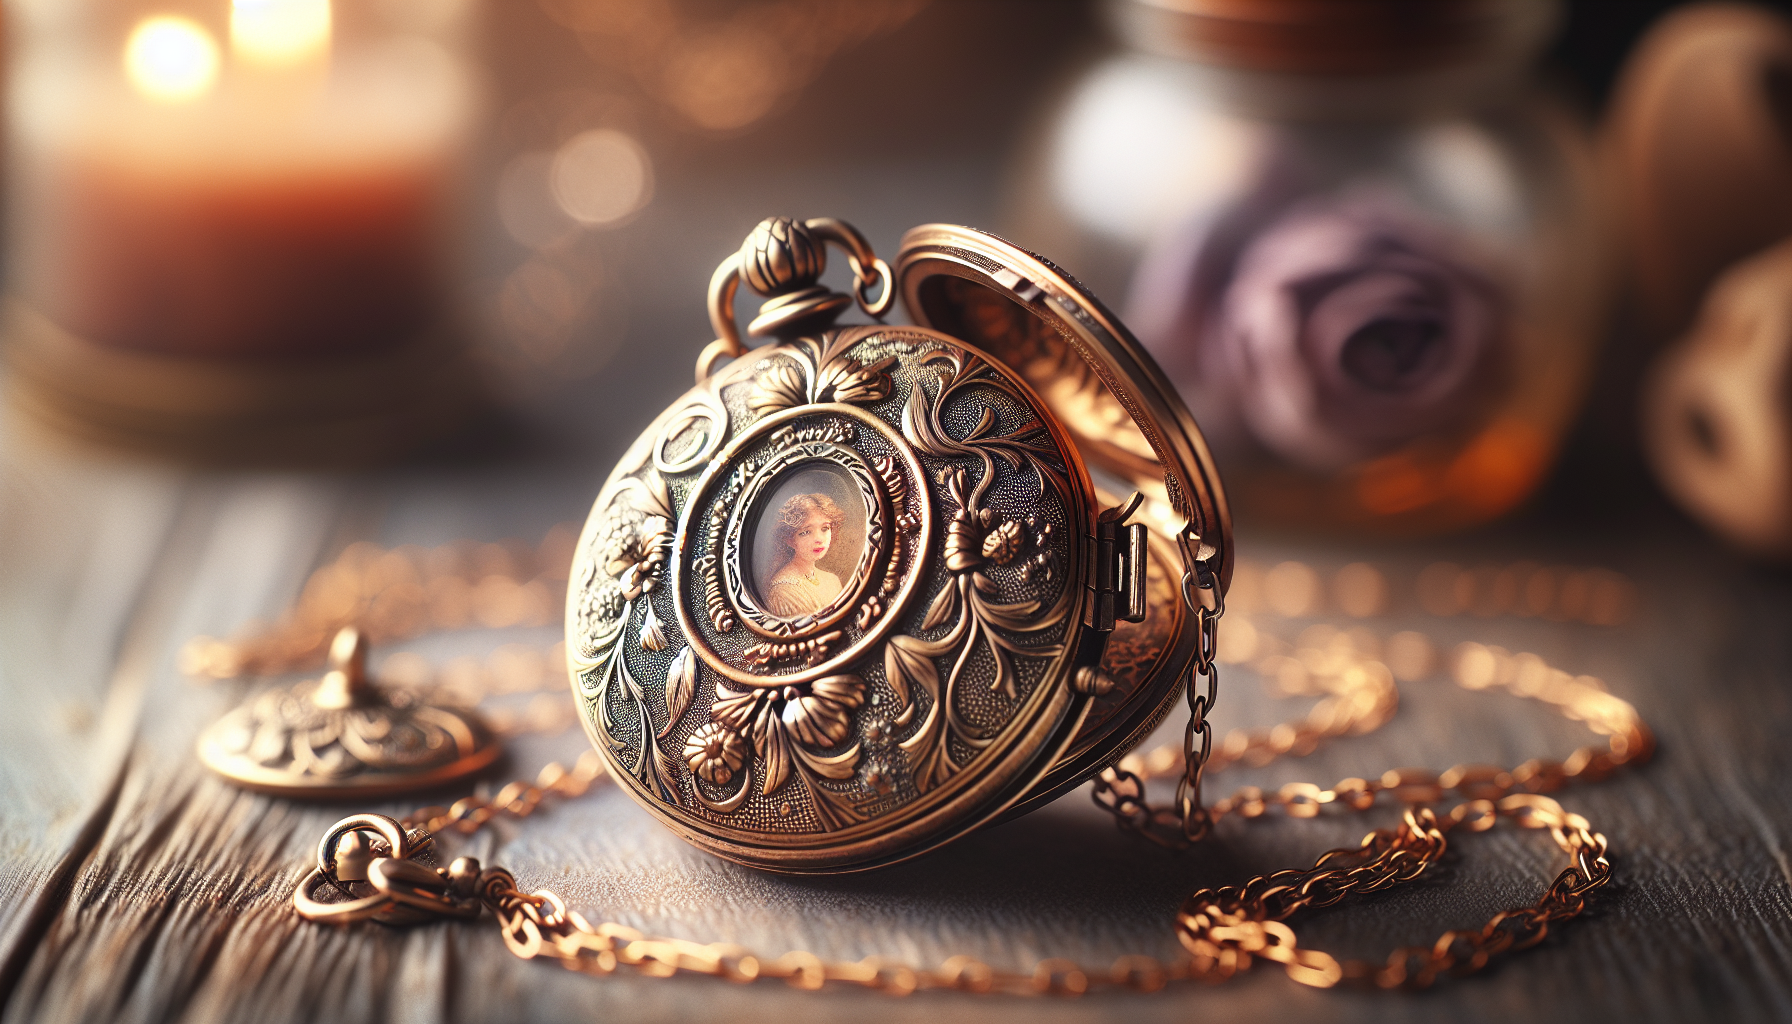 A soothing exploration of locket pendant necklaces, capturing their irreplaceable charm. This scene displays an ornate locket with an intricate floral pattern, delicately hanging from a sturdy, yet el